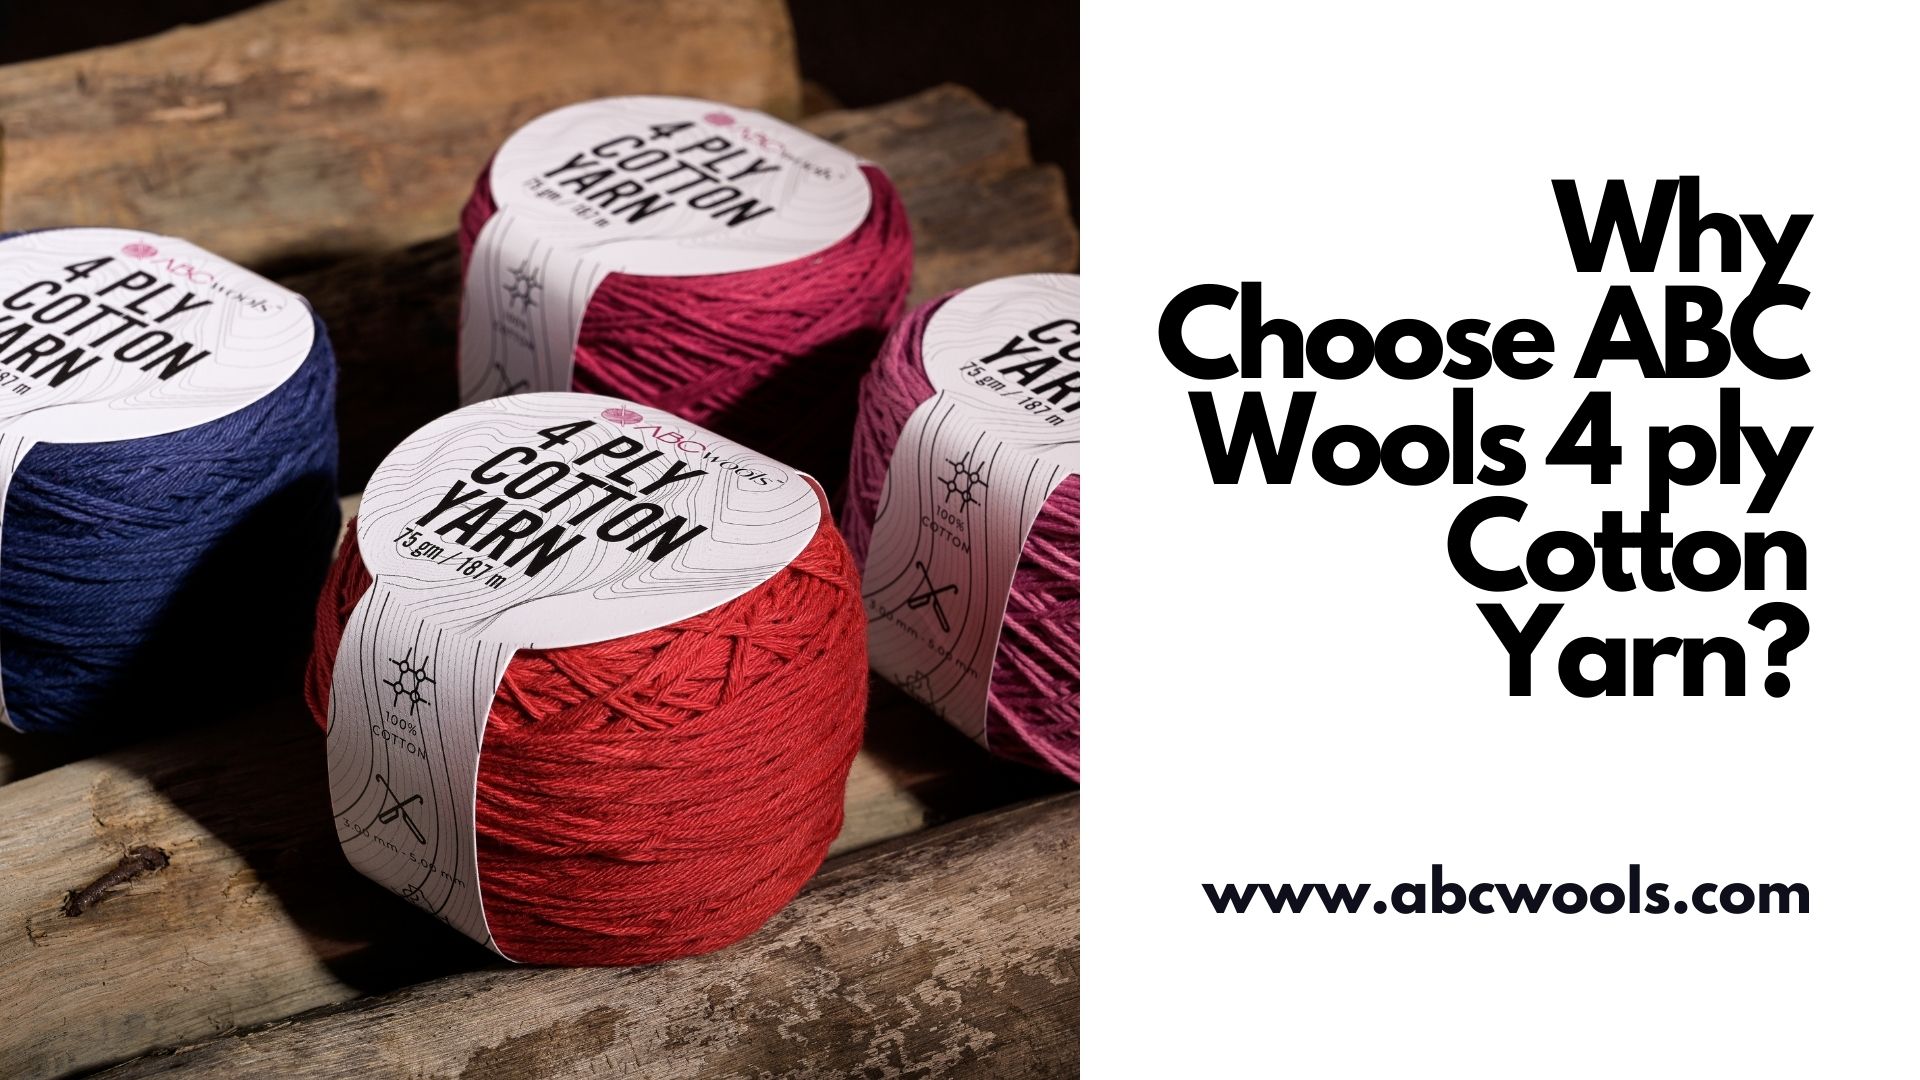 Why Choose ABC Wools 4 ply Cotton Yarn?